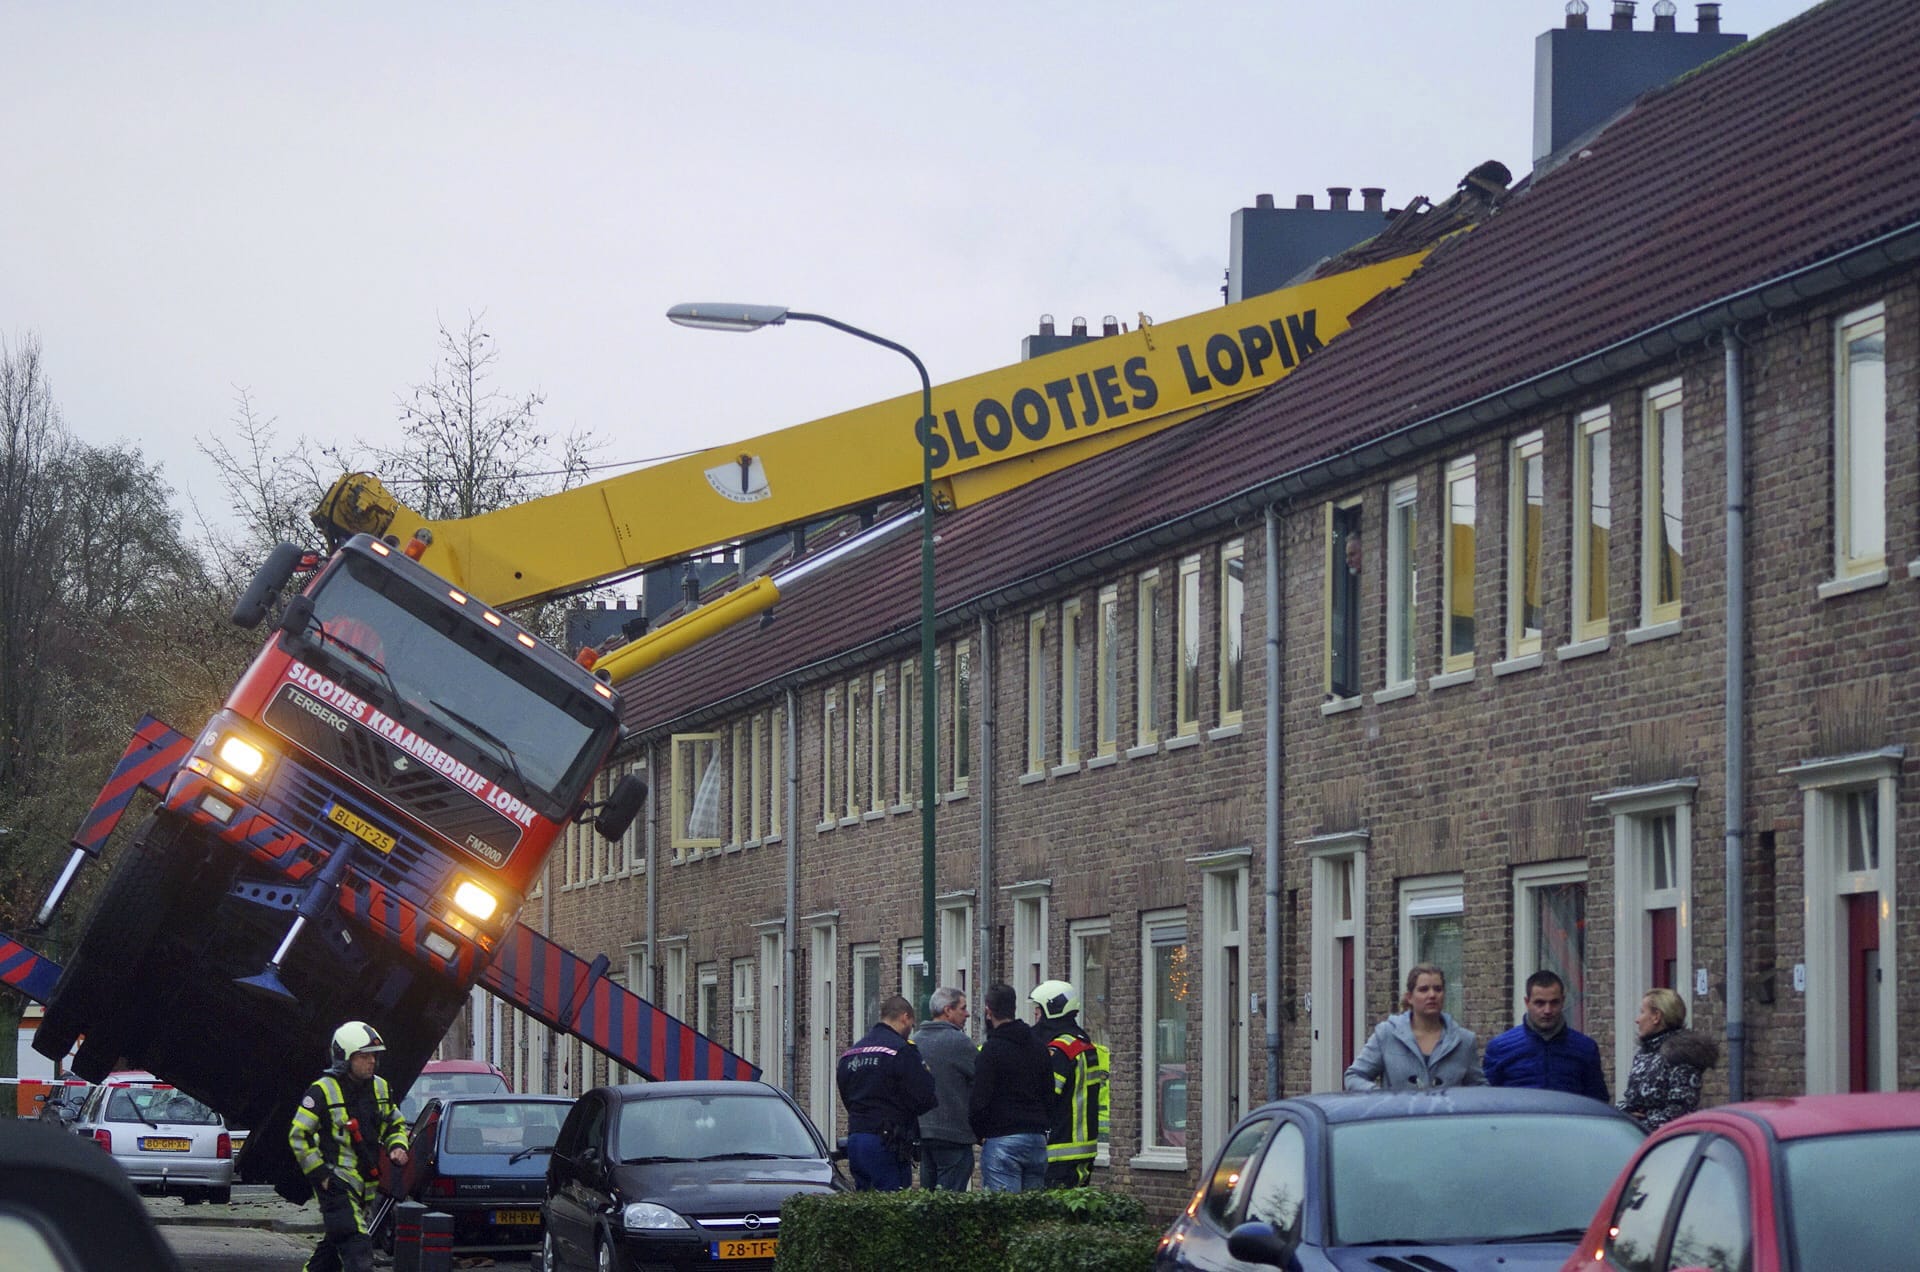 A crane which crashed into the roof of a house is seen following an unusual marriage proposal by a man who wished to be lifted in front of the bedroom window of his girlfriend to ask for her hand in marriage, in the central Dutch town of IJsselstein, Saturday Dec. 13, 2014. No people were injured in the accident, the groom-to-be jumped to safety without injuries and his girlfriend accepted to marry him, according to local Dutch media.